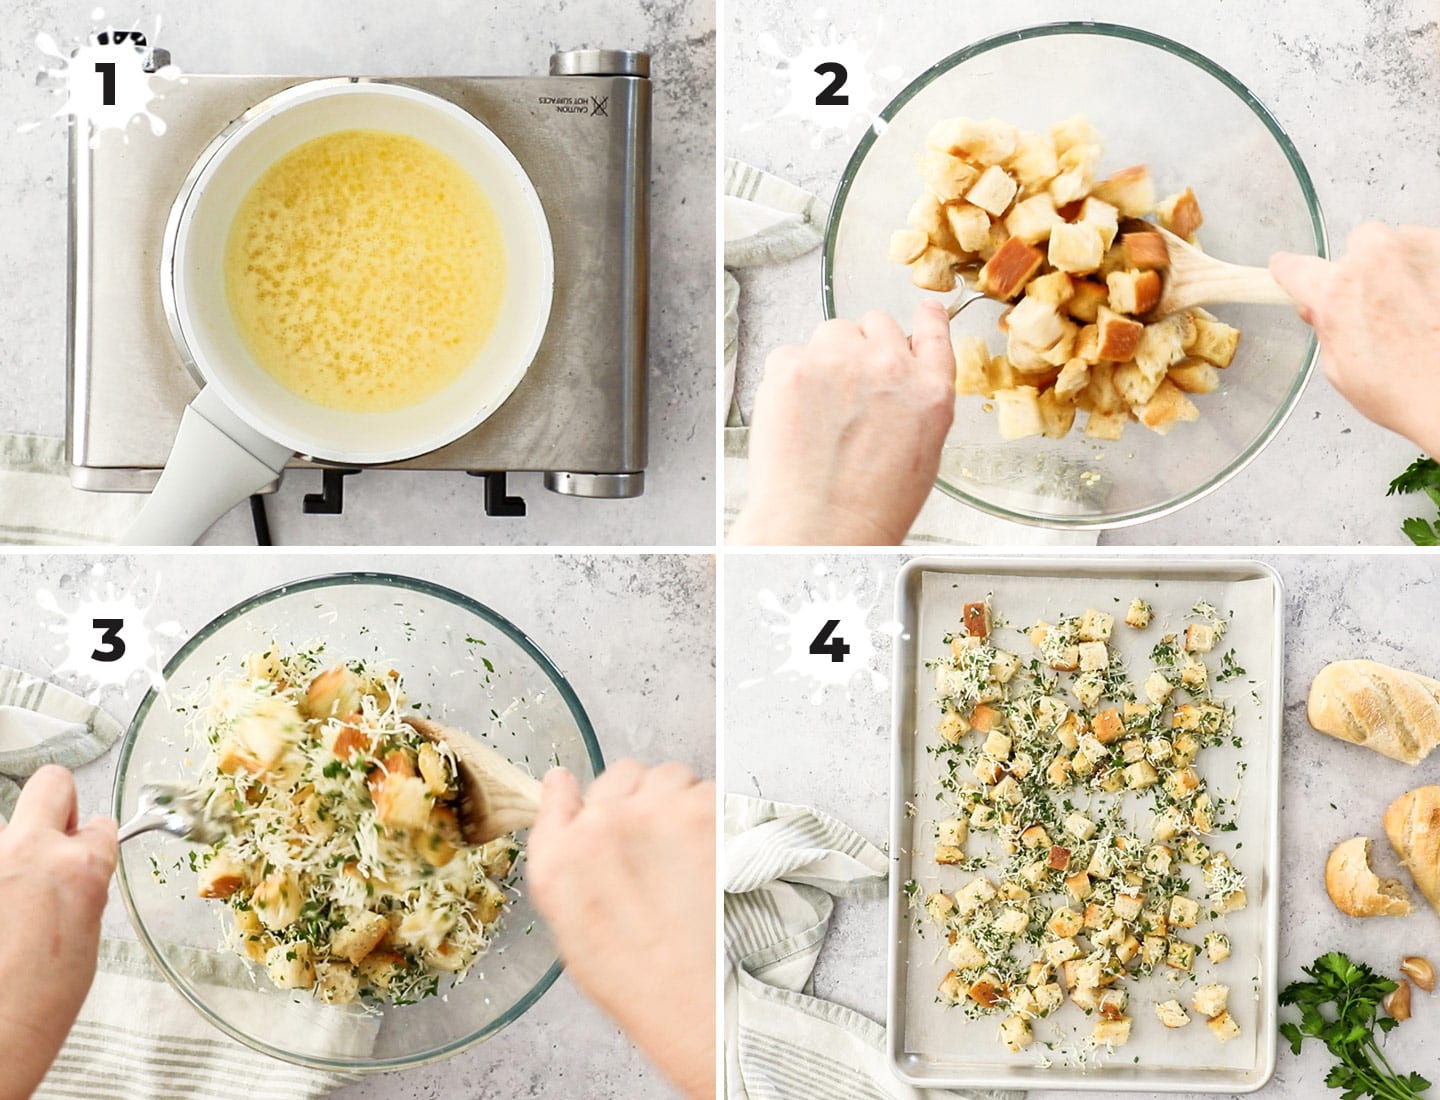 A collage showing how to make cheese and garlic croutons.